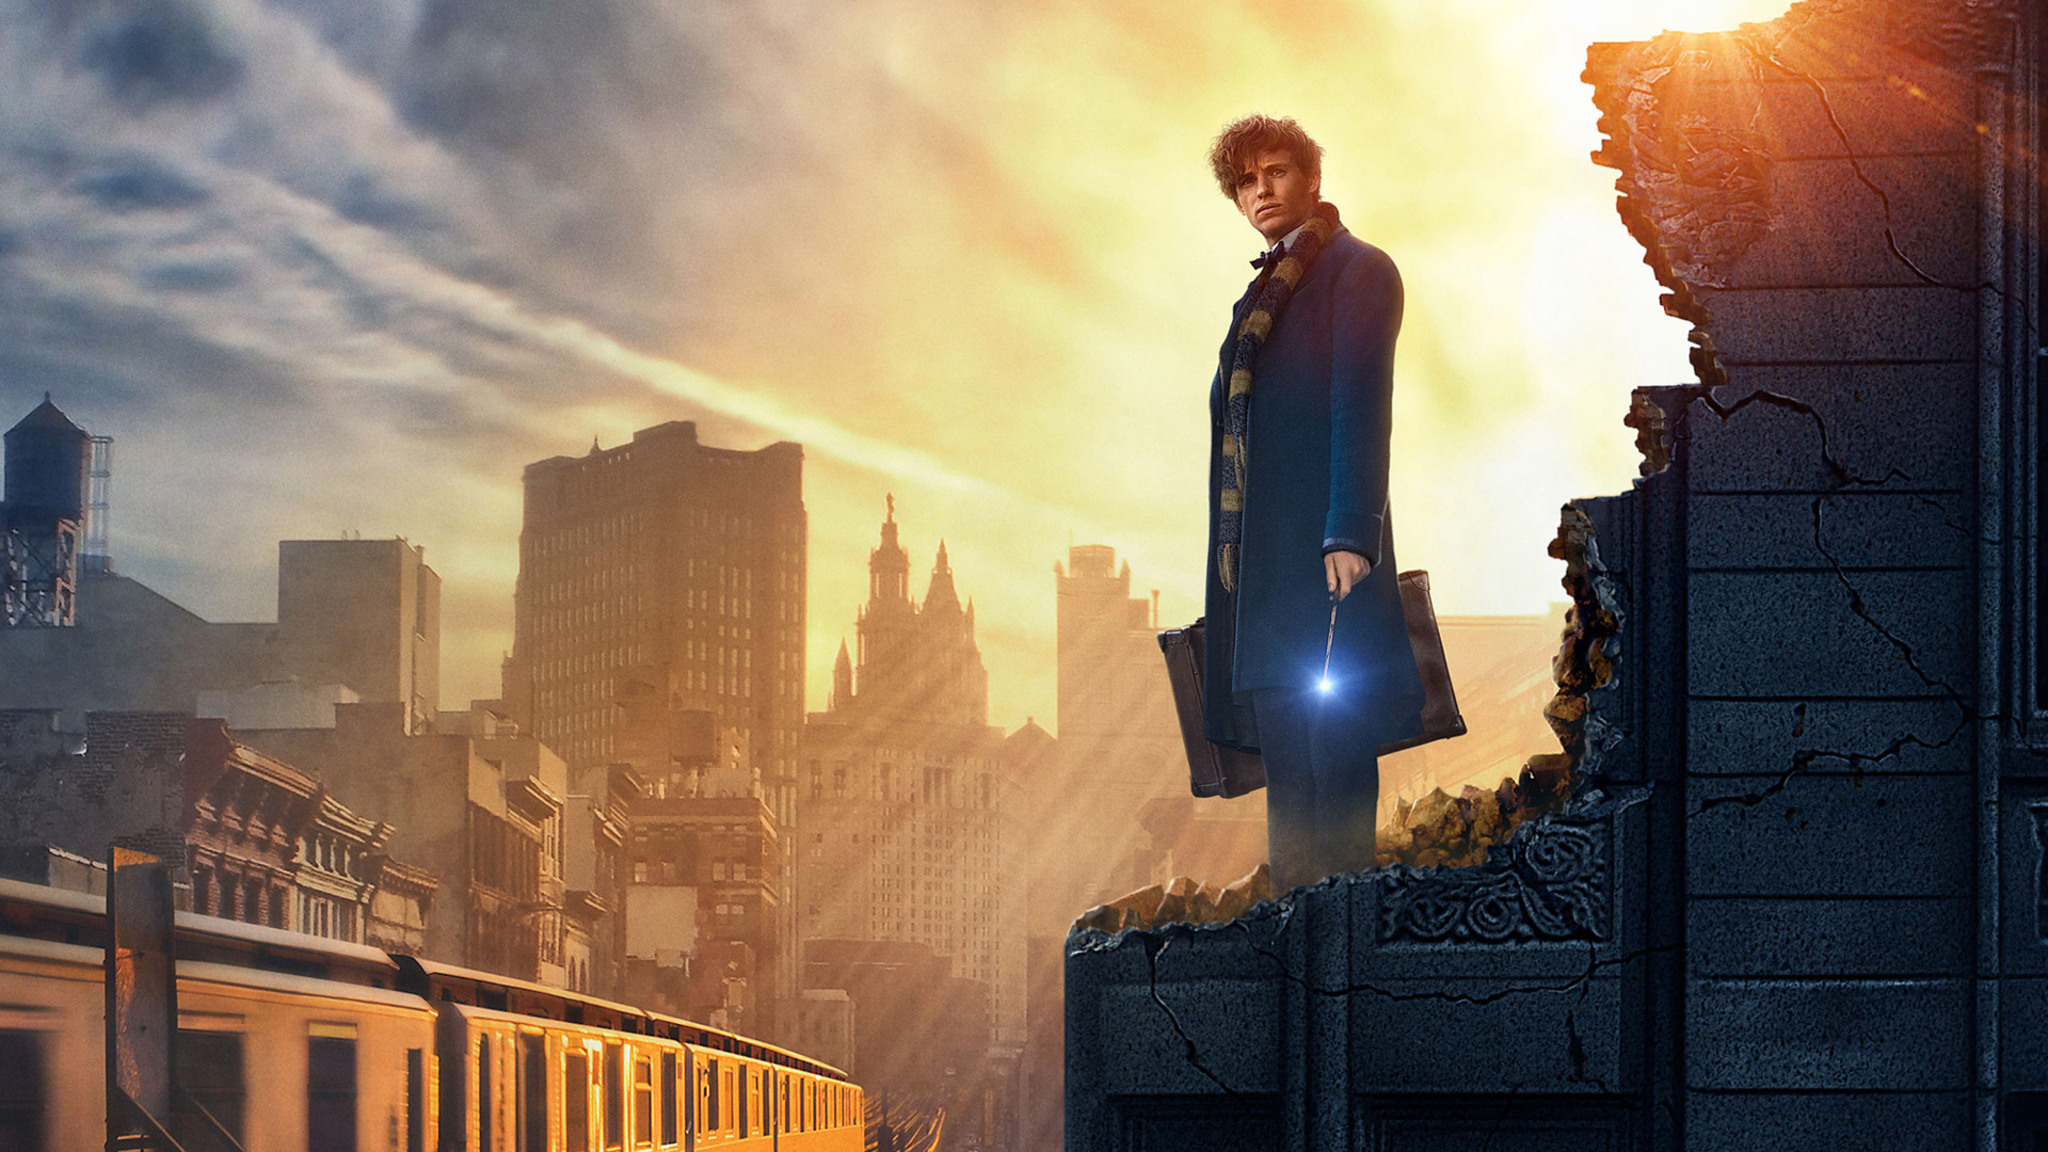 Fantastic Beasts And Where To Find Them 2016 Online Movie Watch Hd